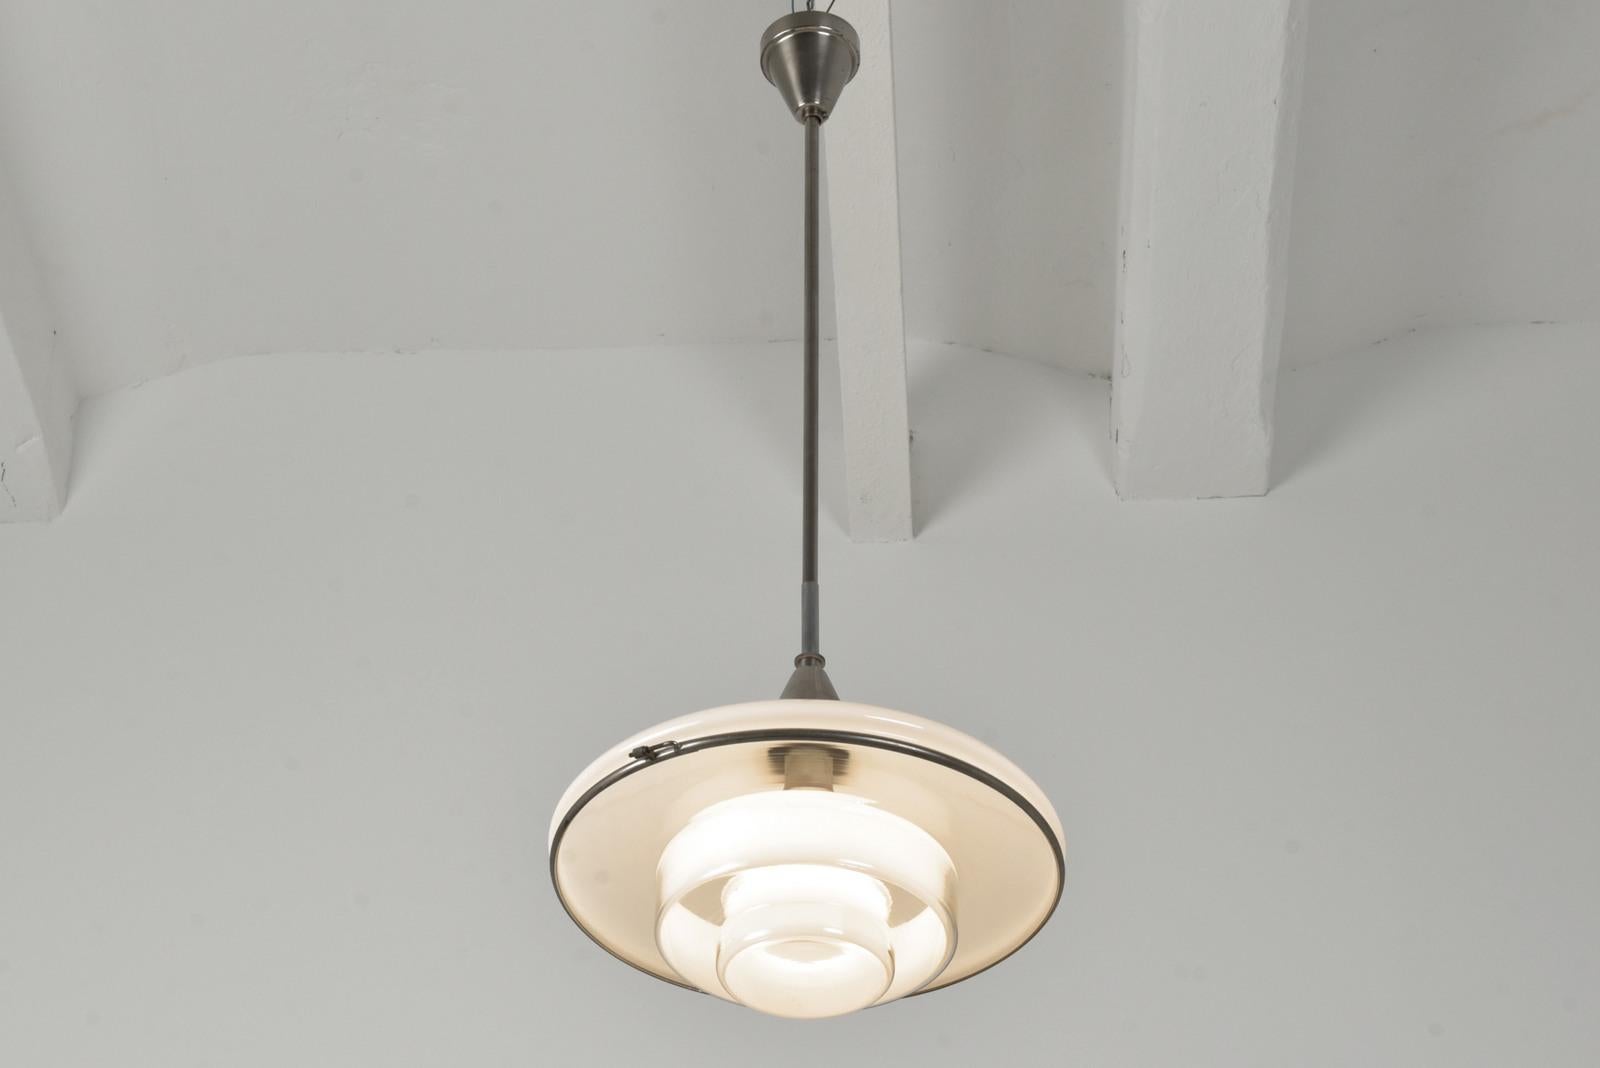 Steel Pendant Lamp by C. F. Otto Müller for SISTRAH, Germany - 1931 For Sale